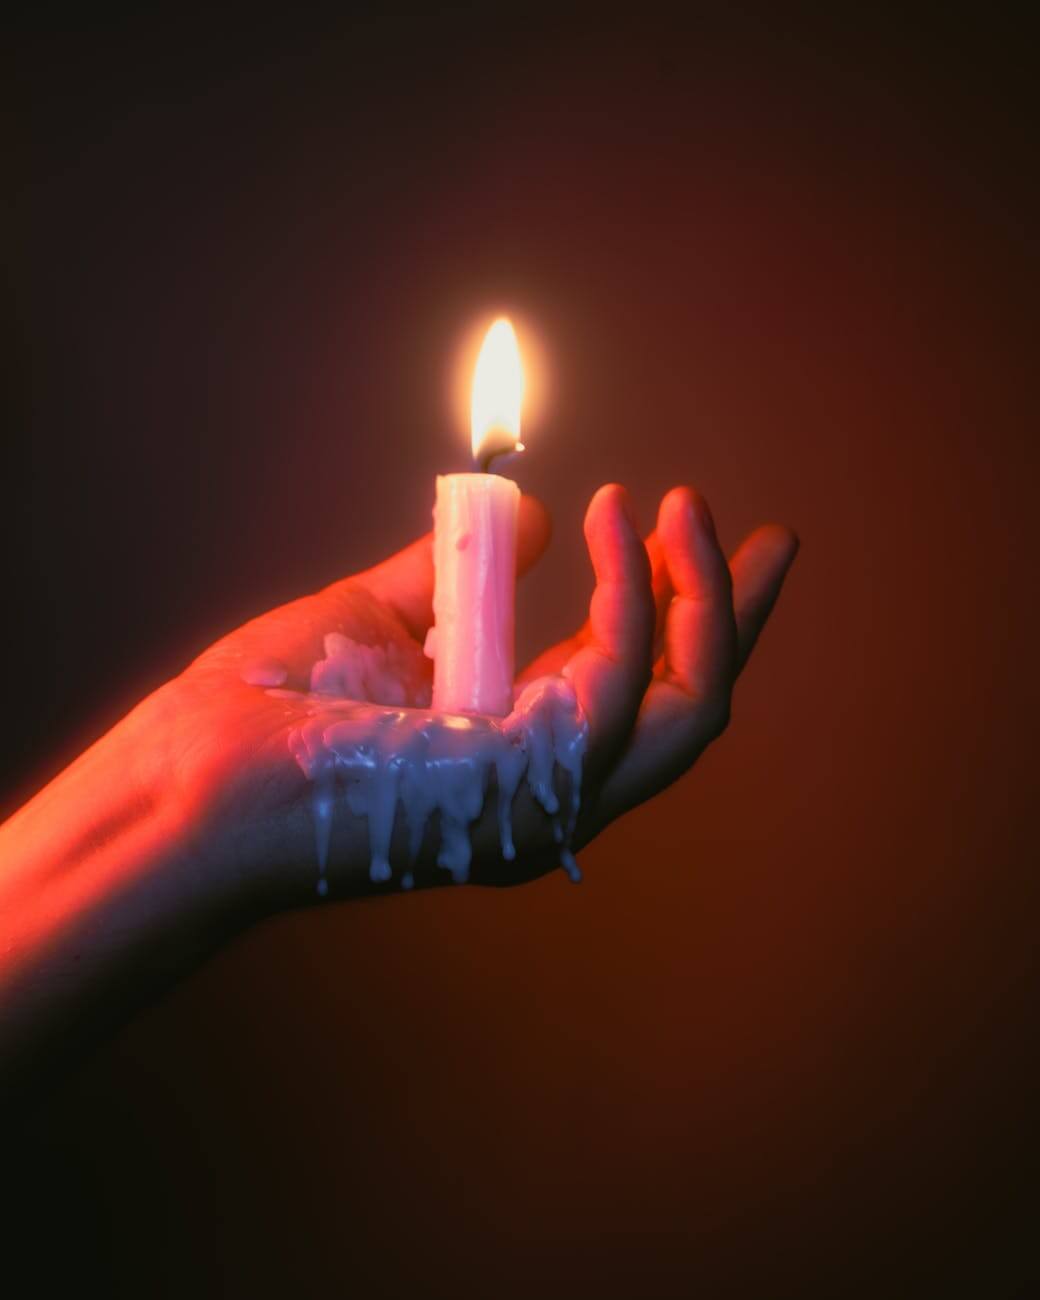 melting wax candle in hand